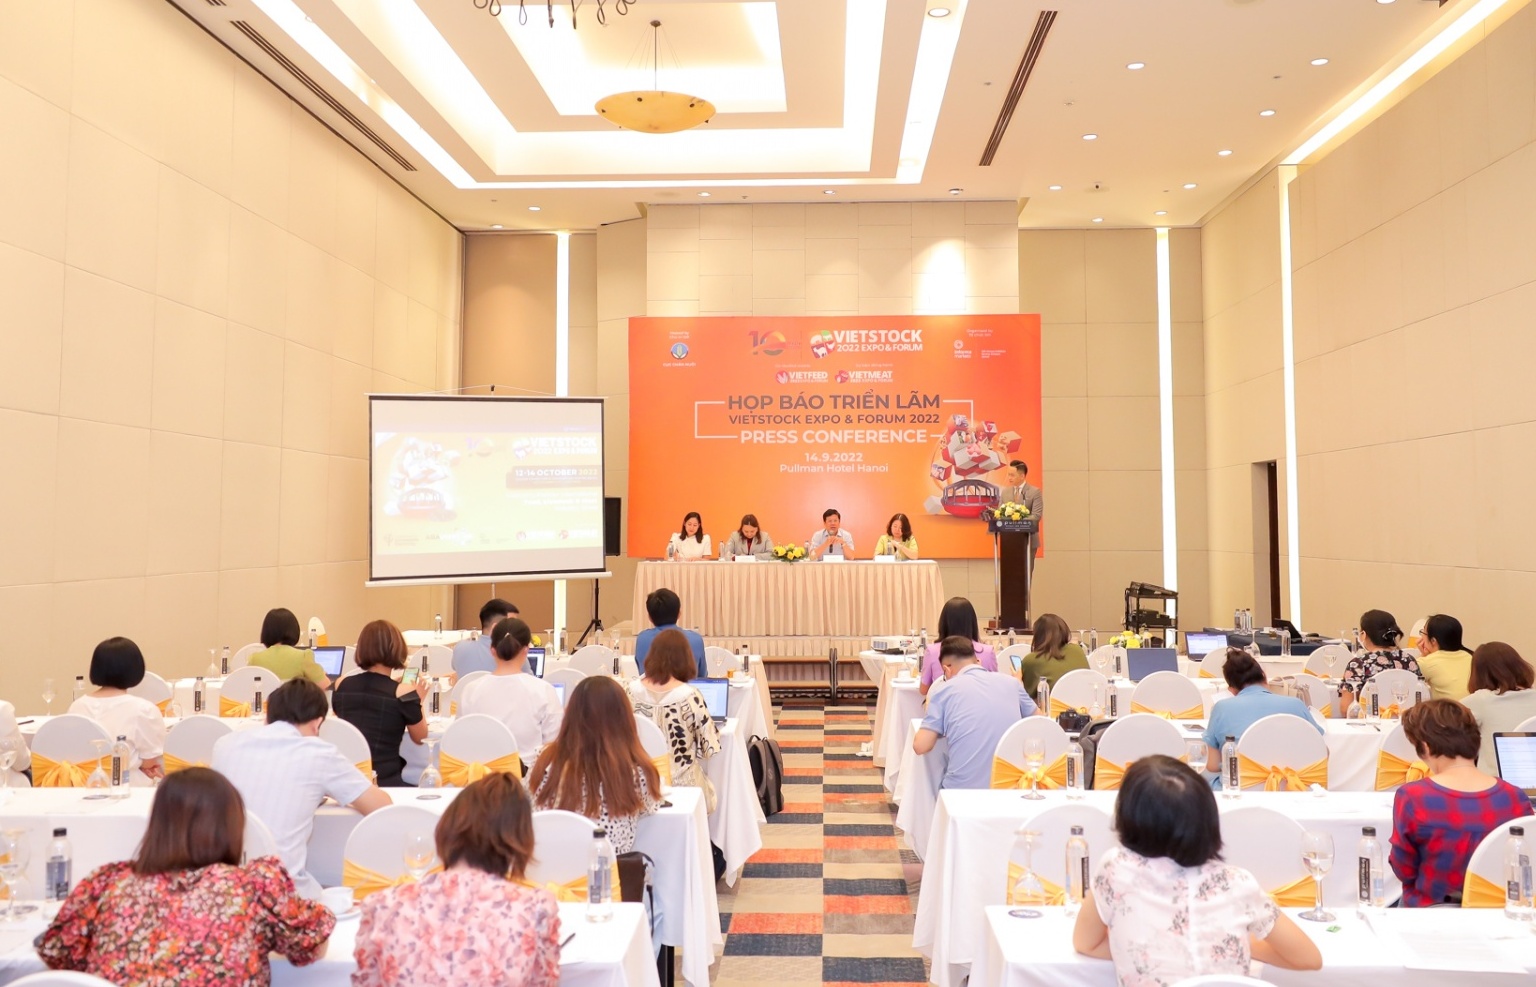 vietstock expo forum 2022 is back in ho chi minh city this october